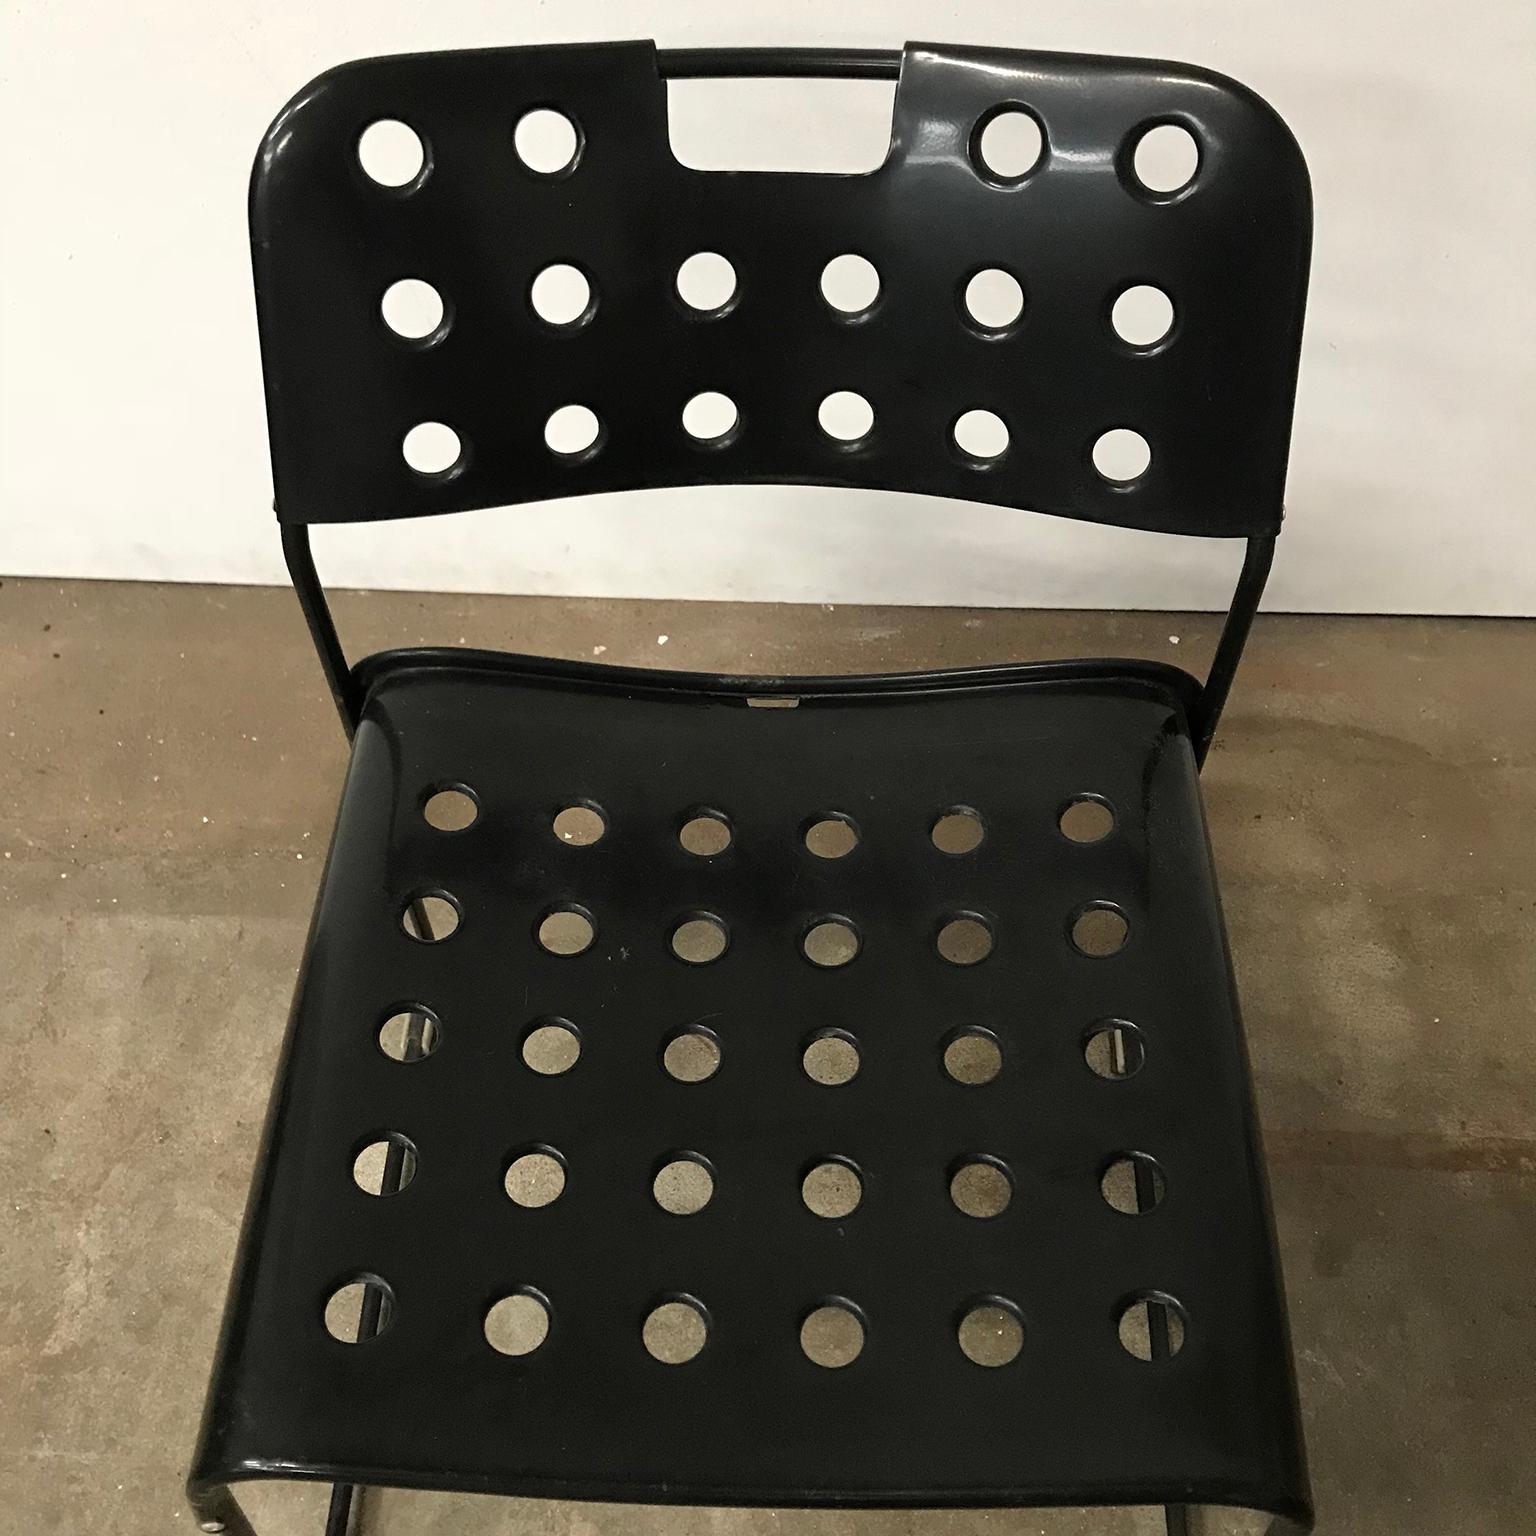 1971, Rodney Kinsman, Set of Rare All Black, Incl. Frame, Omstak Stacking Chairs 4